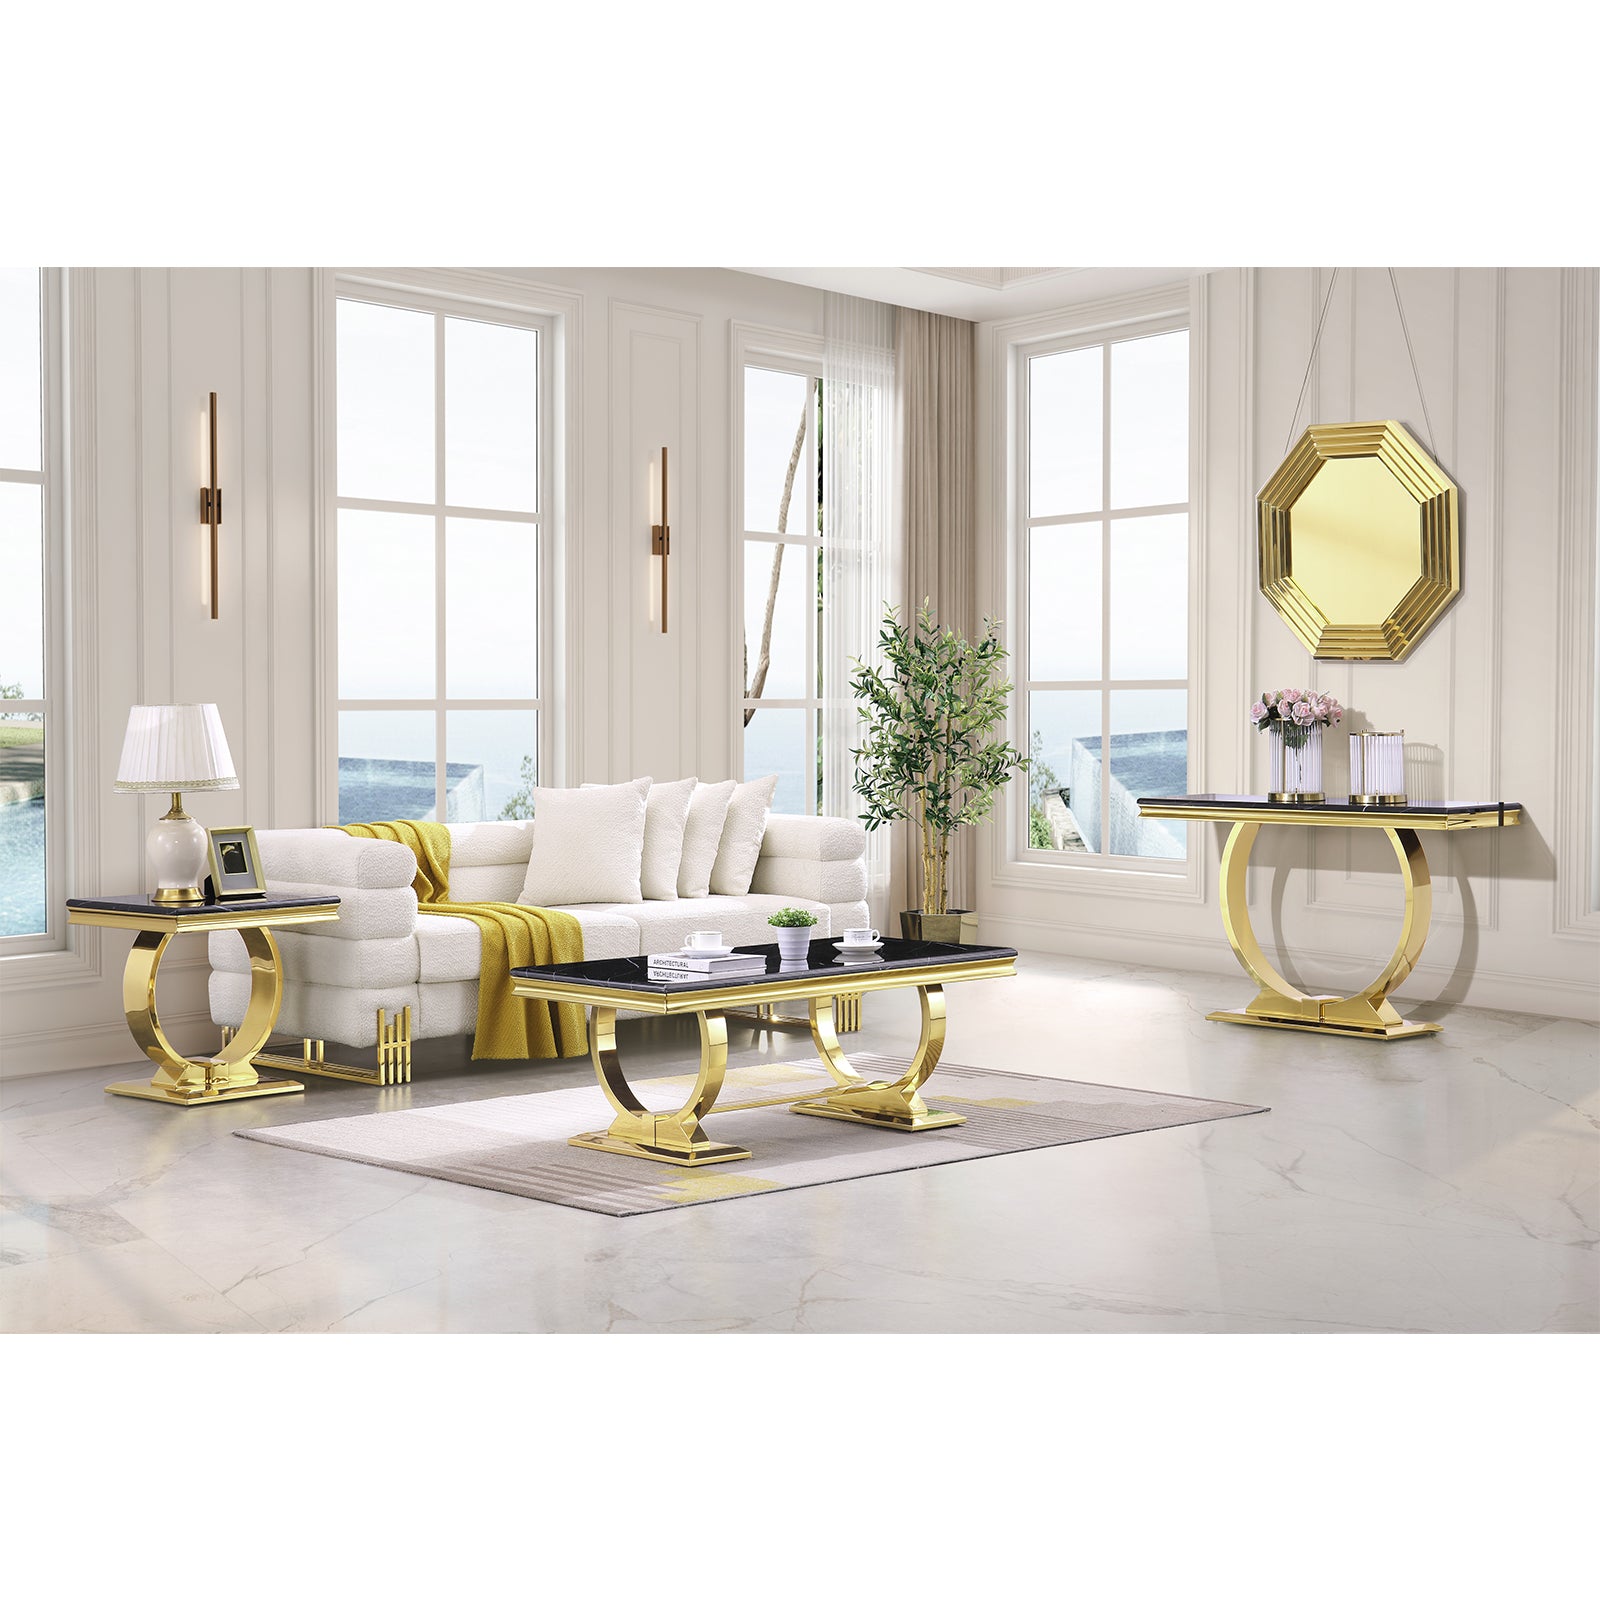 Black End Table With Gold Metal U Base | E400